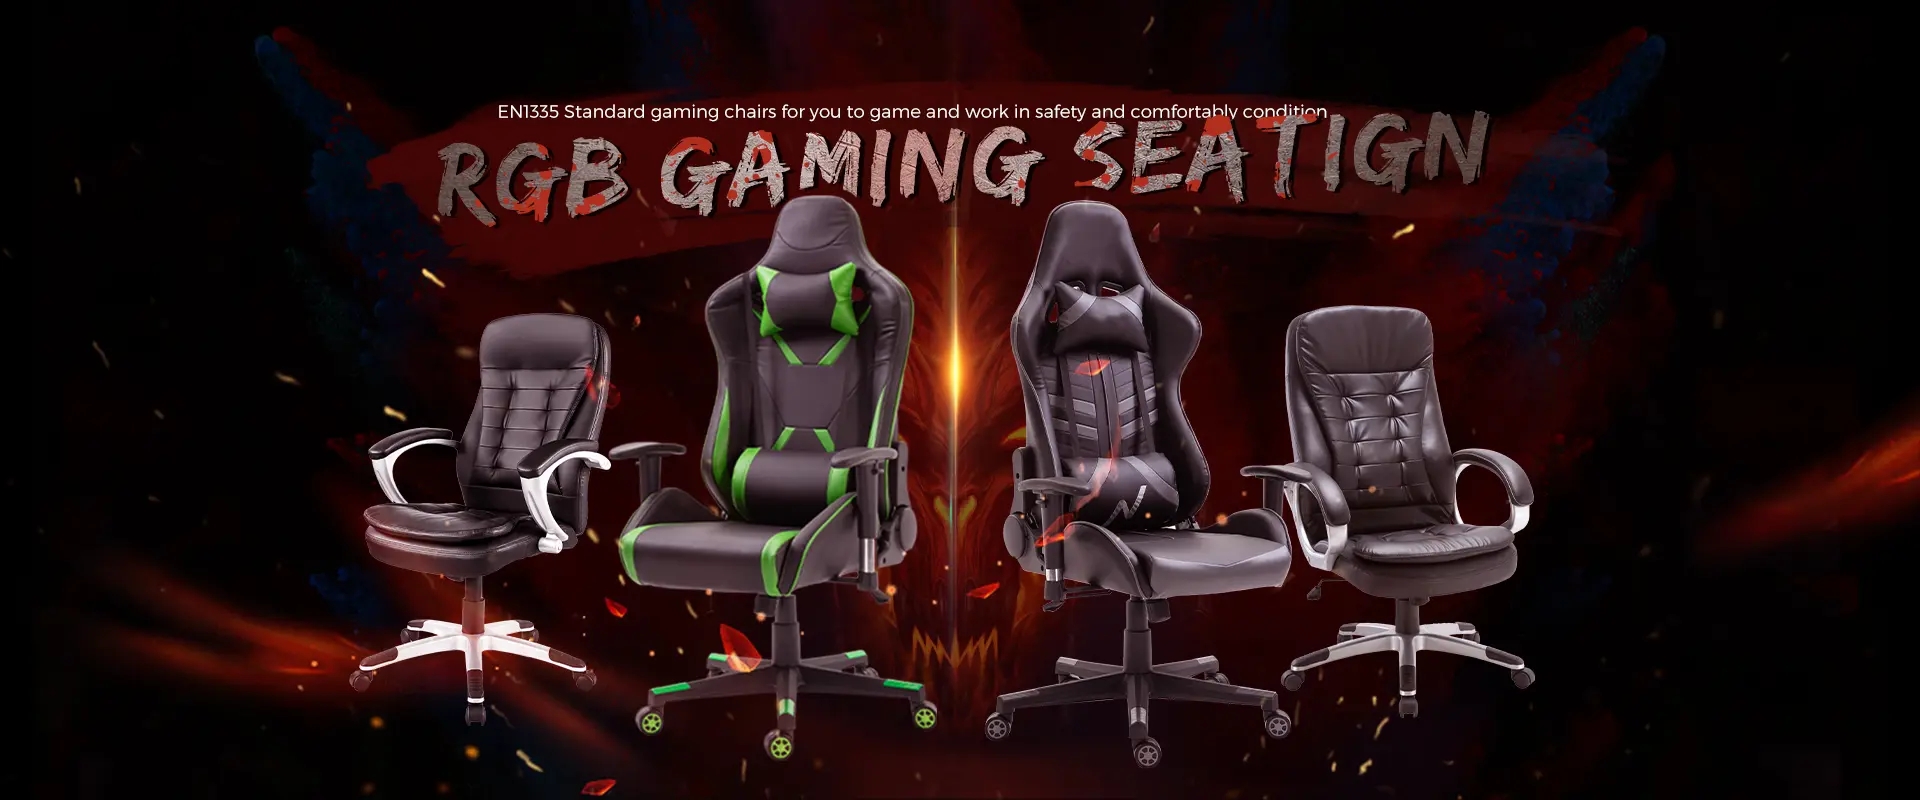 Comfortable and durable gaming chair from Anji Jifang Furniture Co., Ltd.